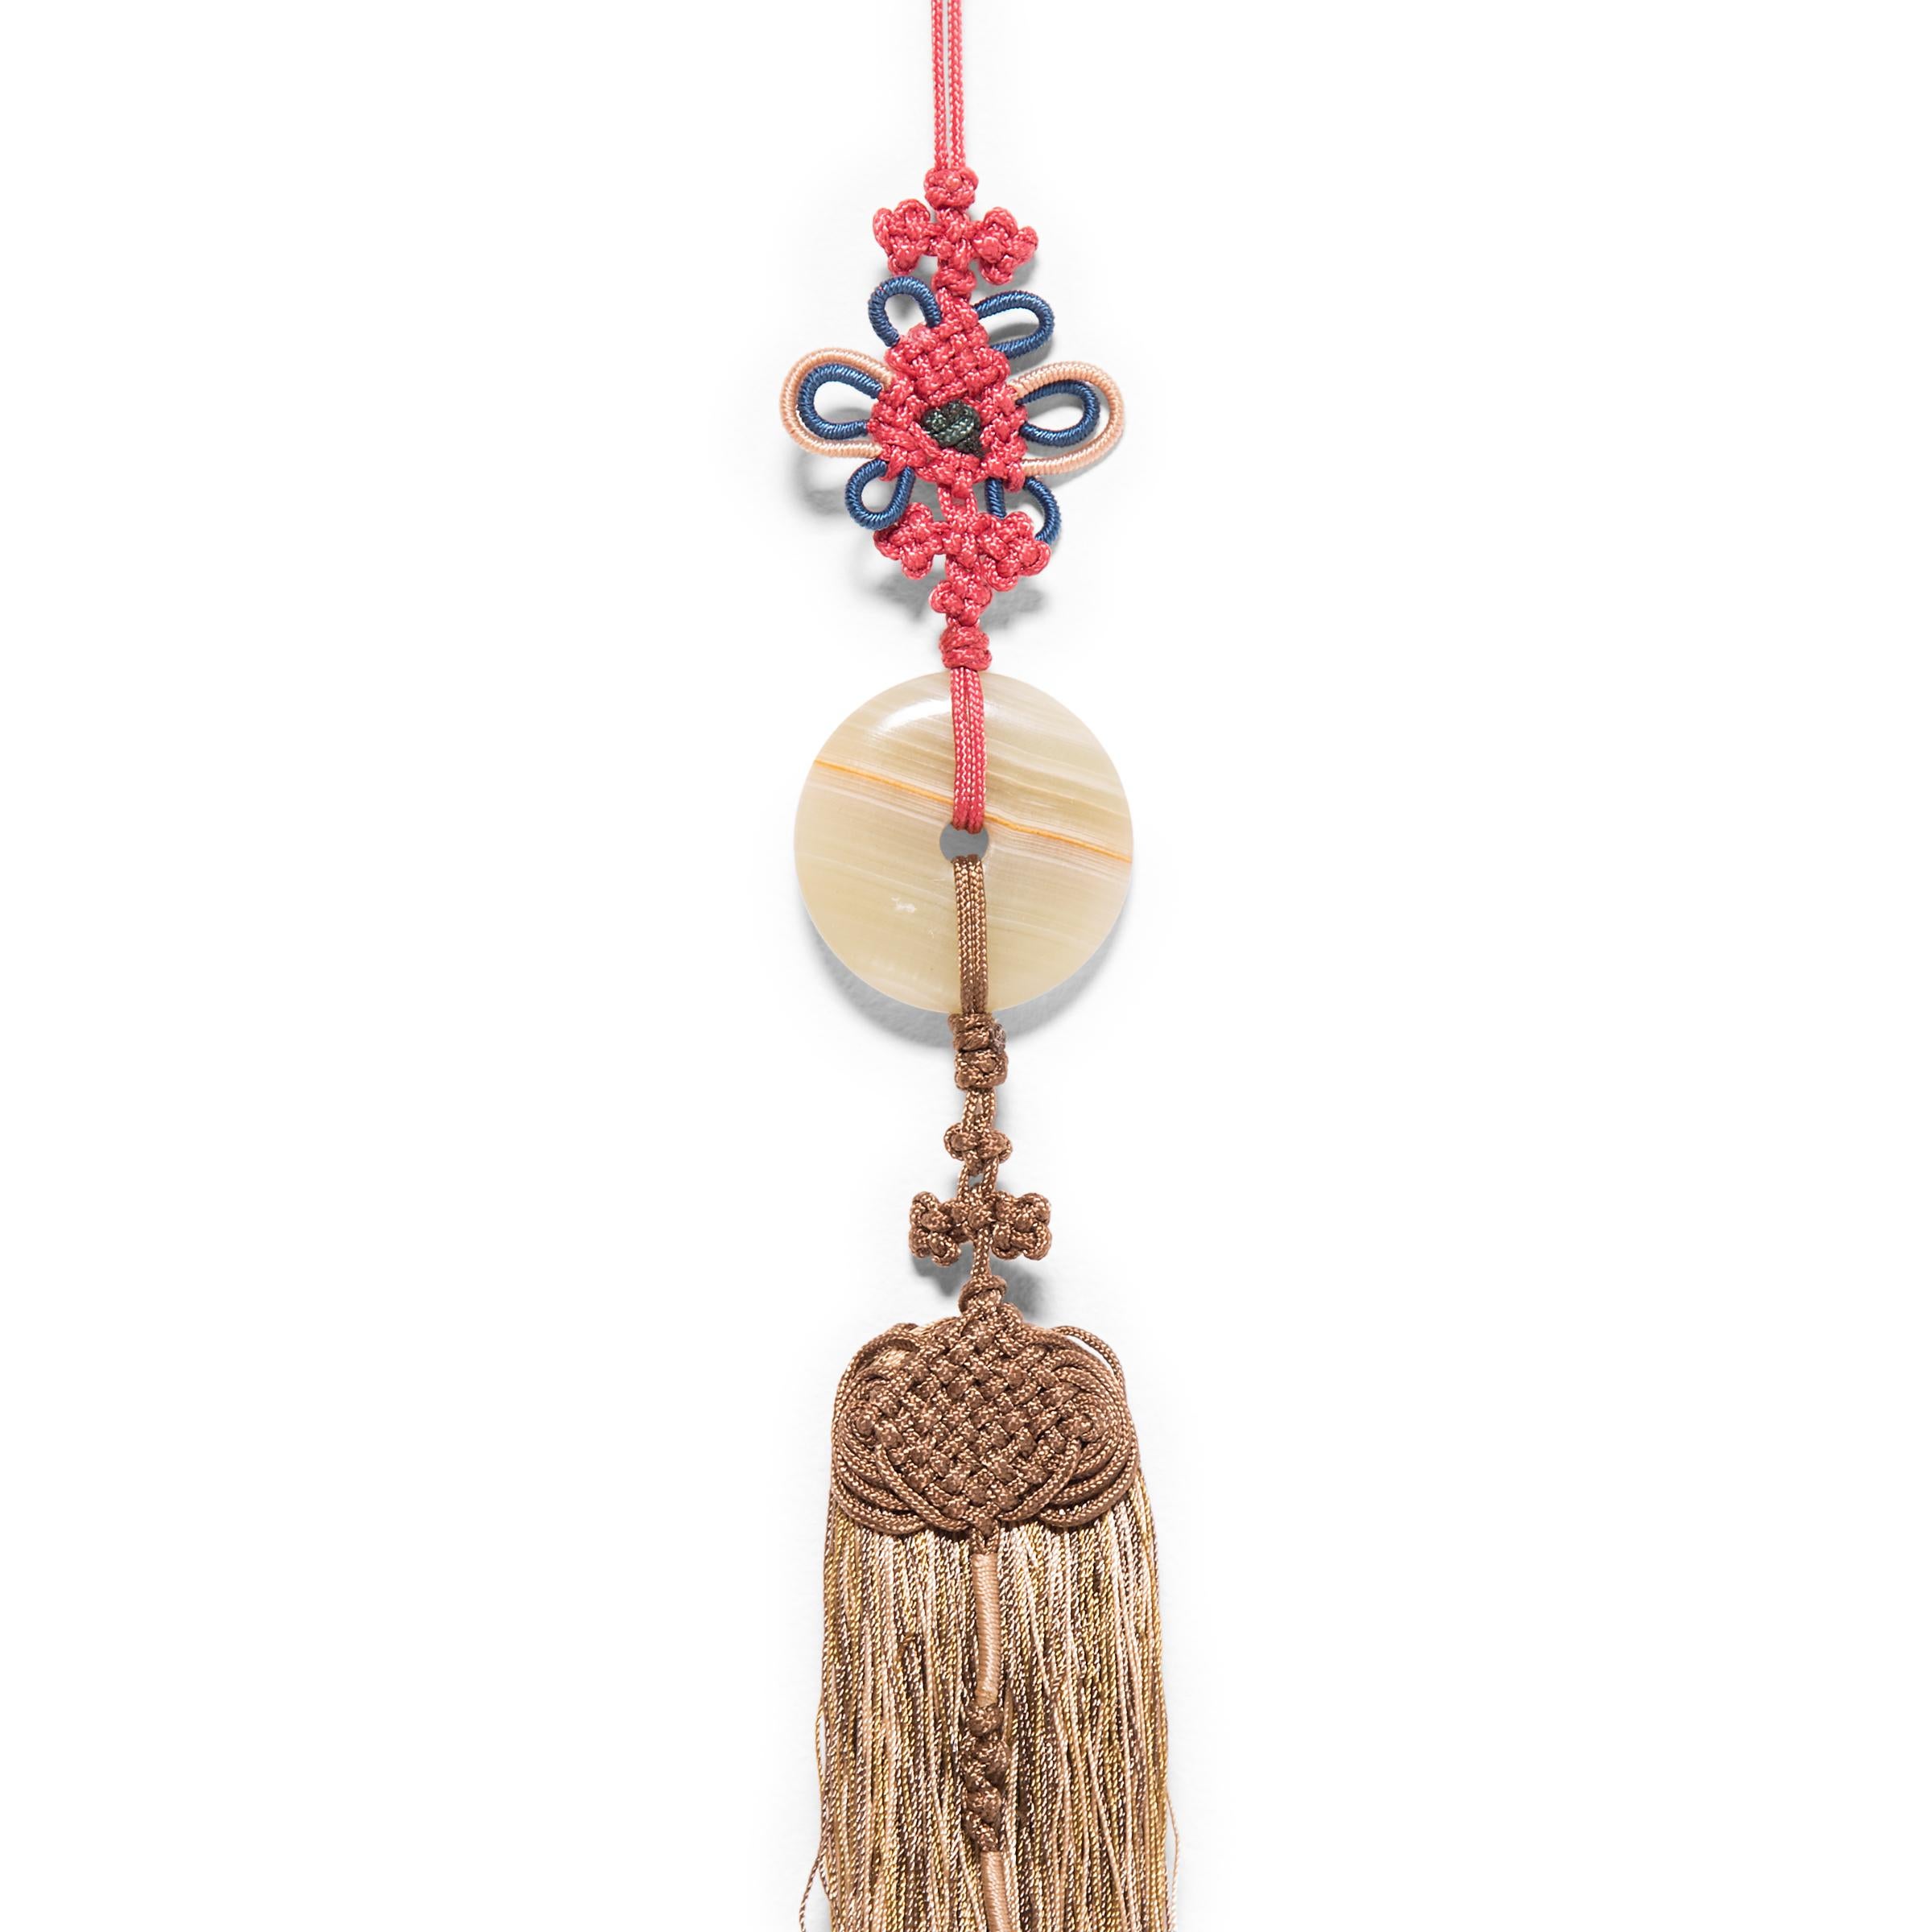 Chinese knotted tassels are used to add elegance to everyday items and bring good fortune wherever they're placed. Fine tassels hold sentimental value, and are often passed down through generations or gifted as a token of one's love.

This long